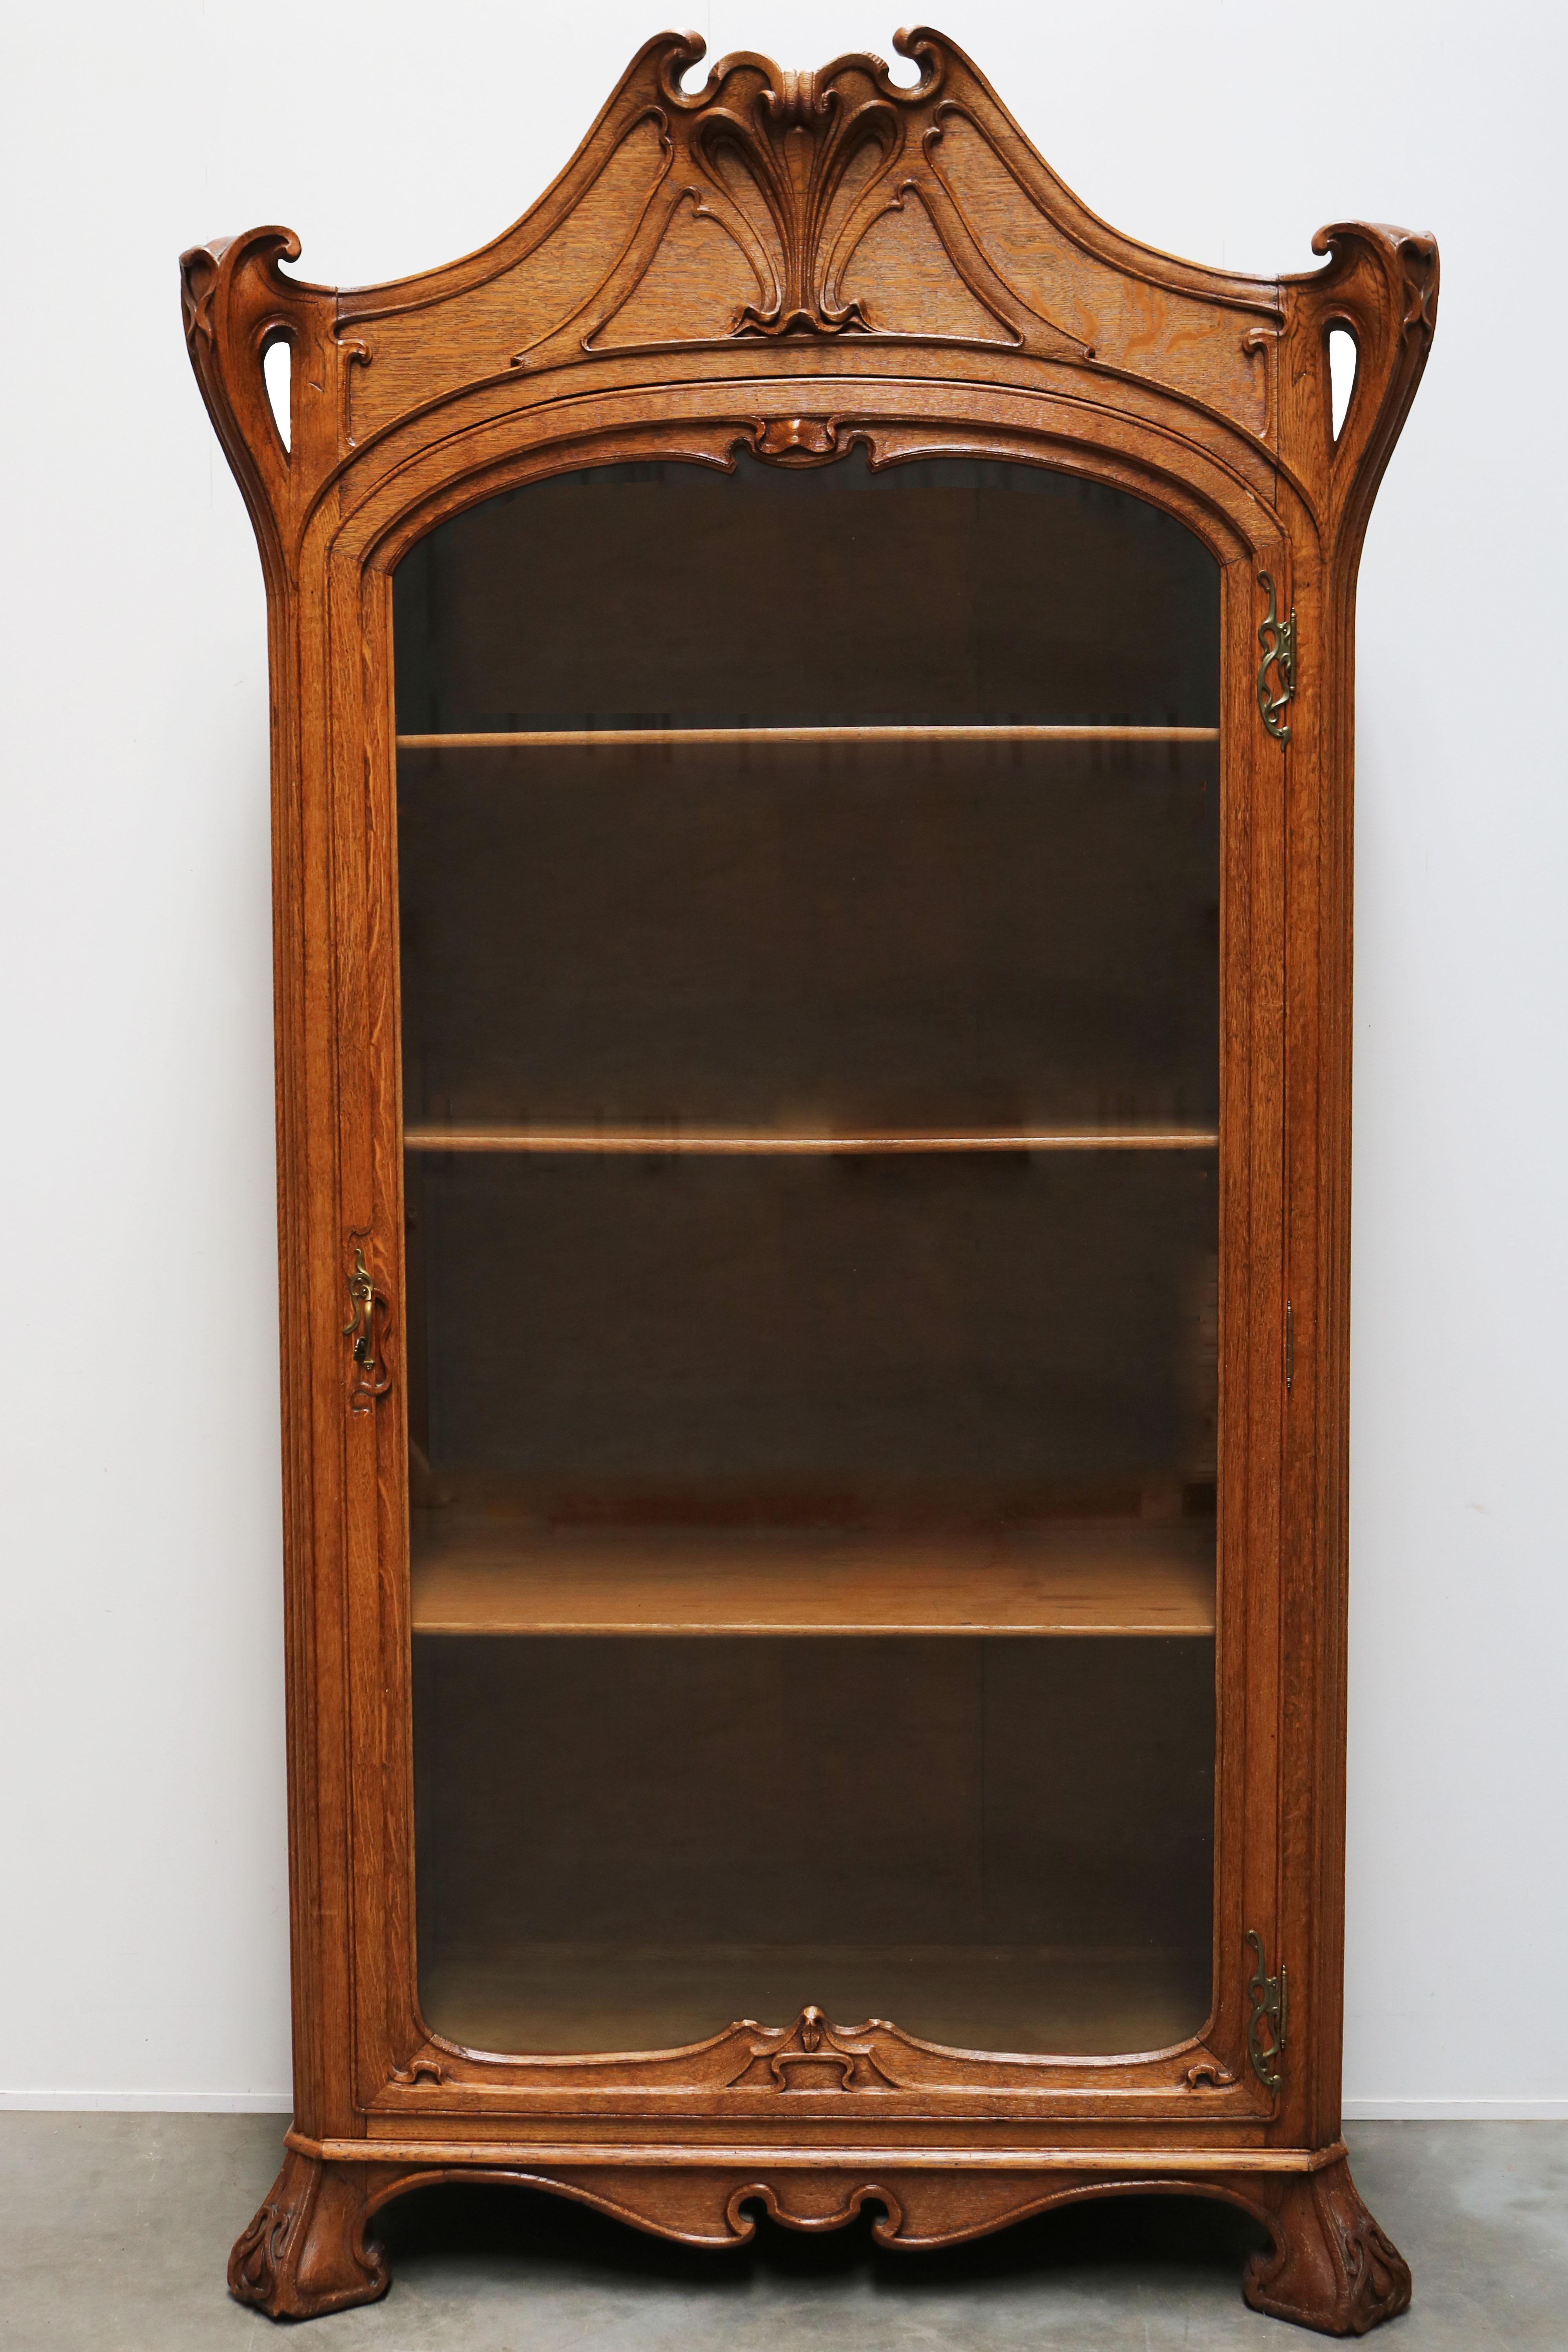 Antique French Art Nouveau Cabinet by Henri Sauvage 1900 Oak Display Cabinet For Sale 1